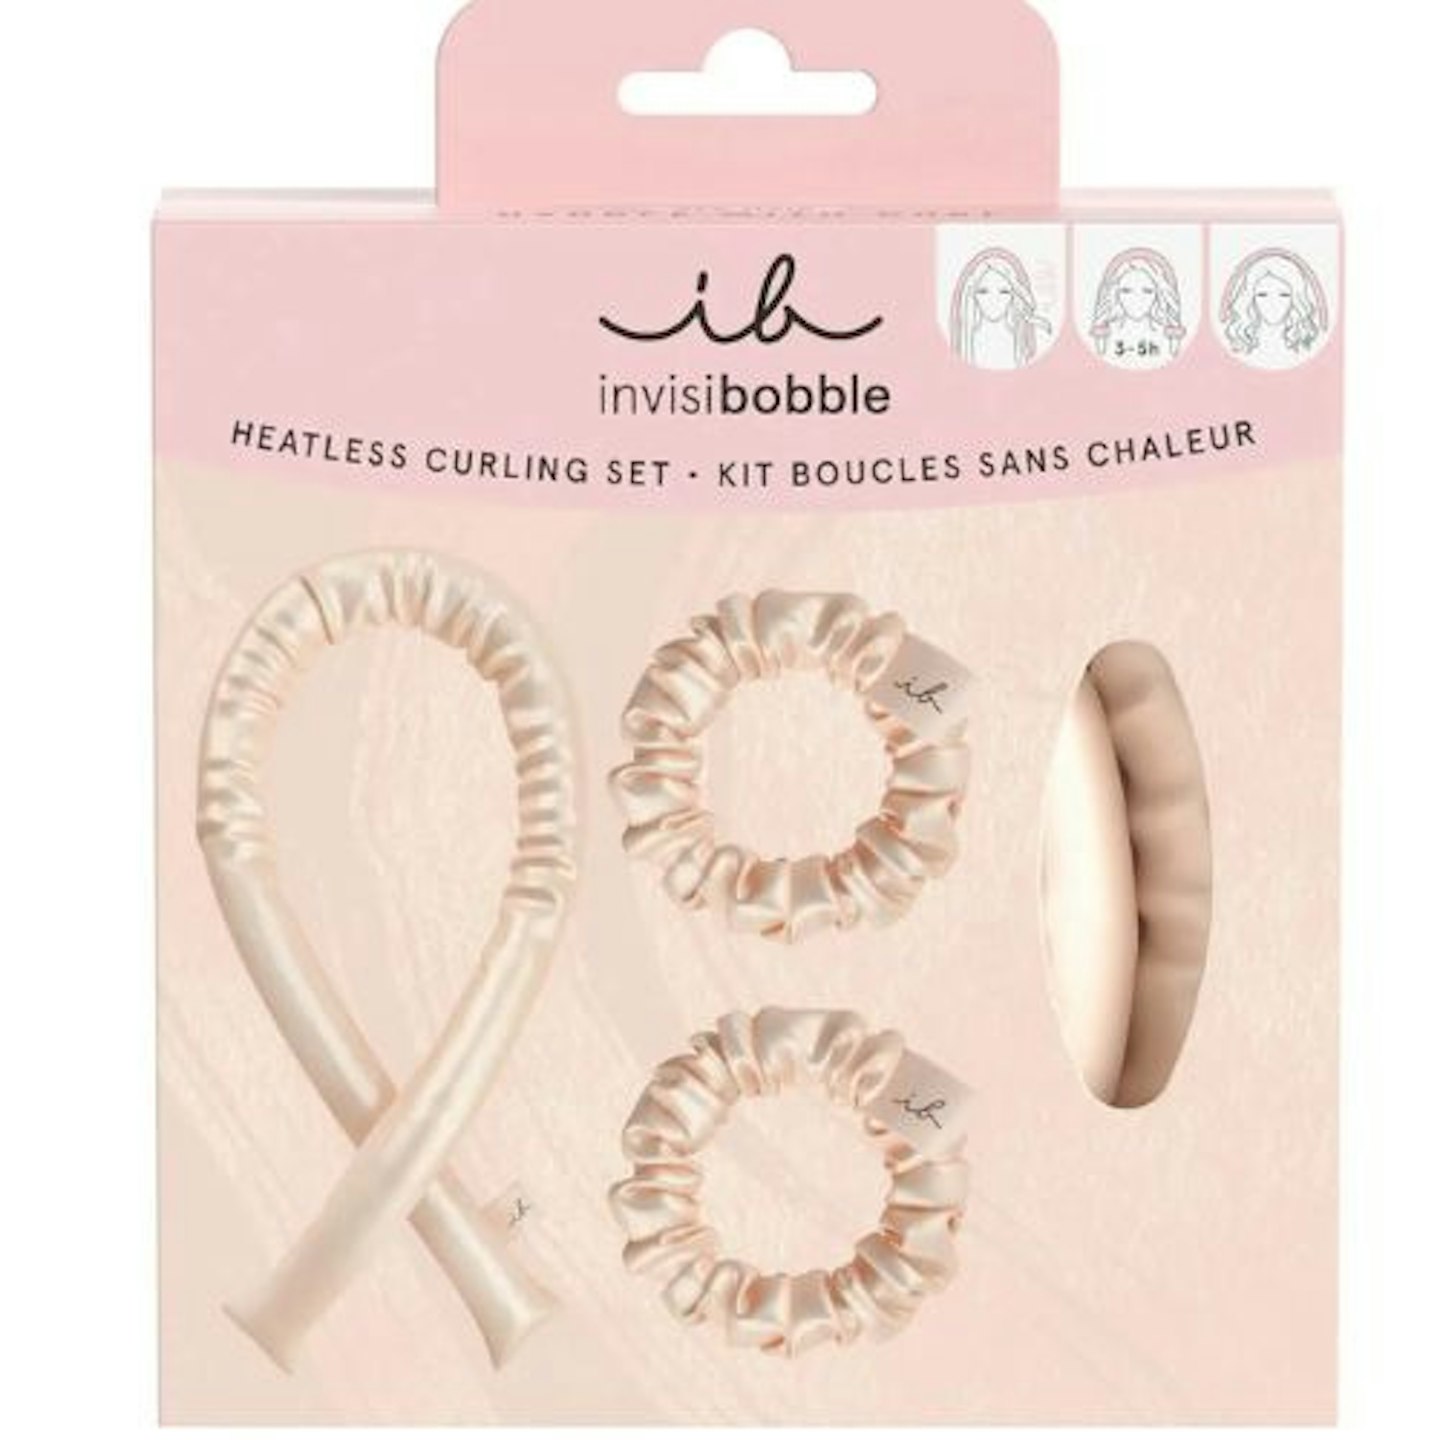 invisibobble Handle with Curl 3-Piece Gift Set